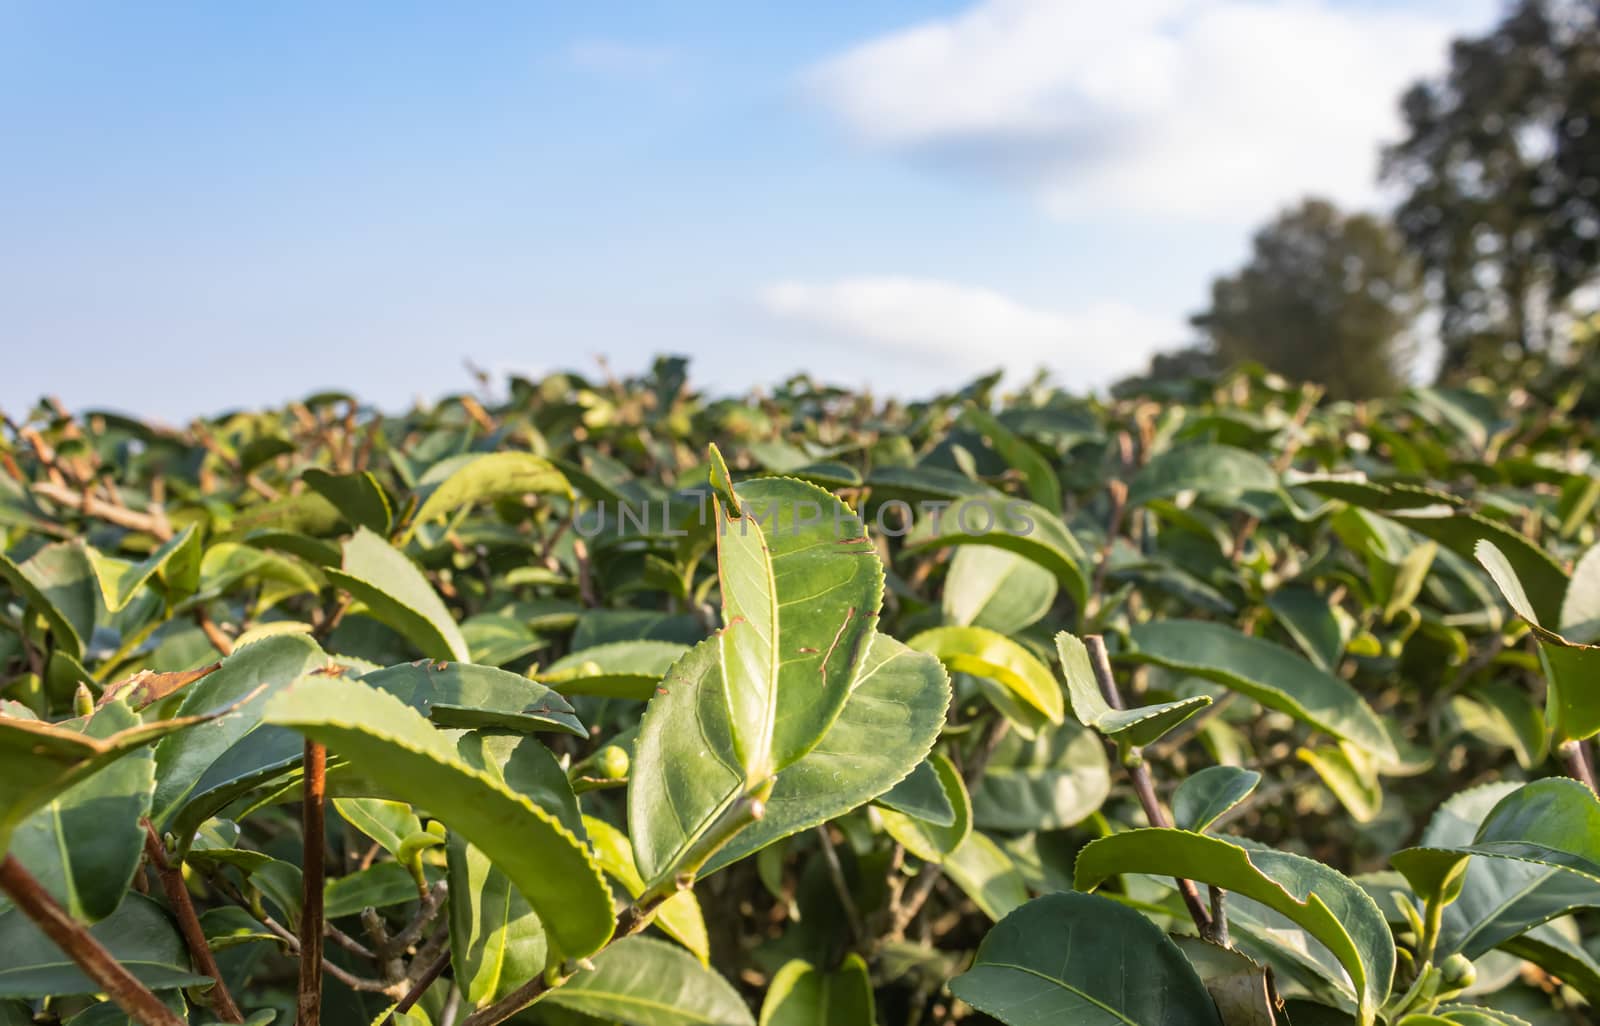 Green Tea Leaves in Tea plantation with Blue Sky and Tree and Sun Light. Tea plantation background with good weather